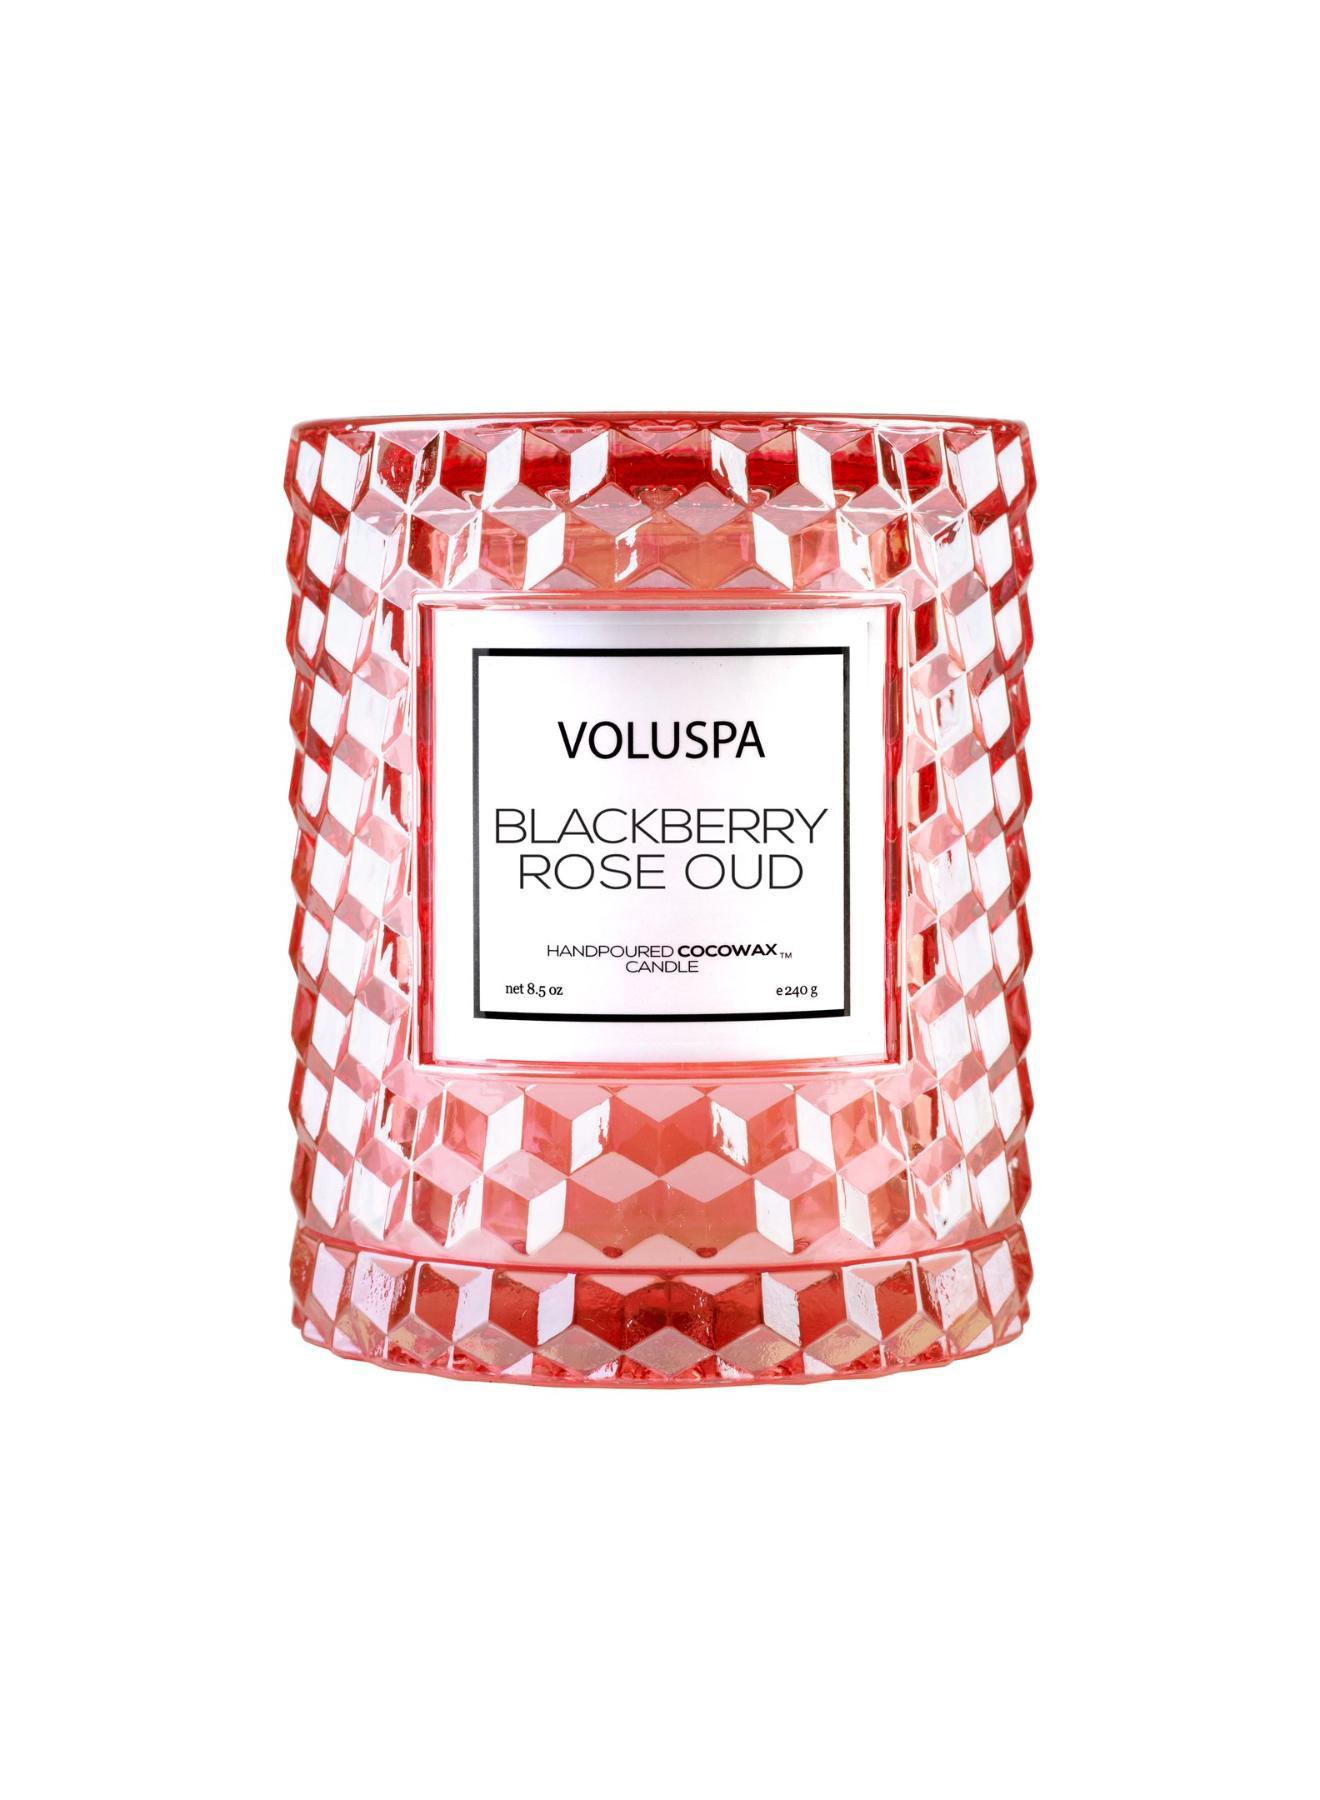 Blackberry rose oud cloche candle - 1